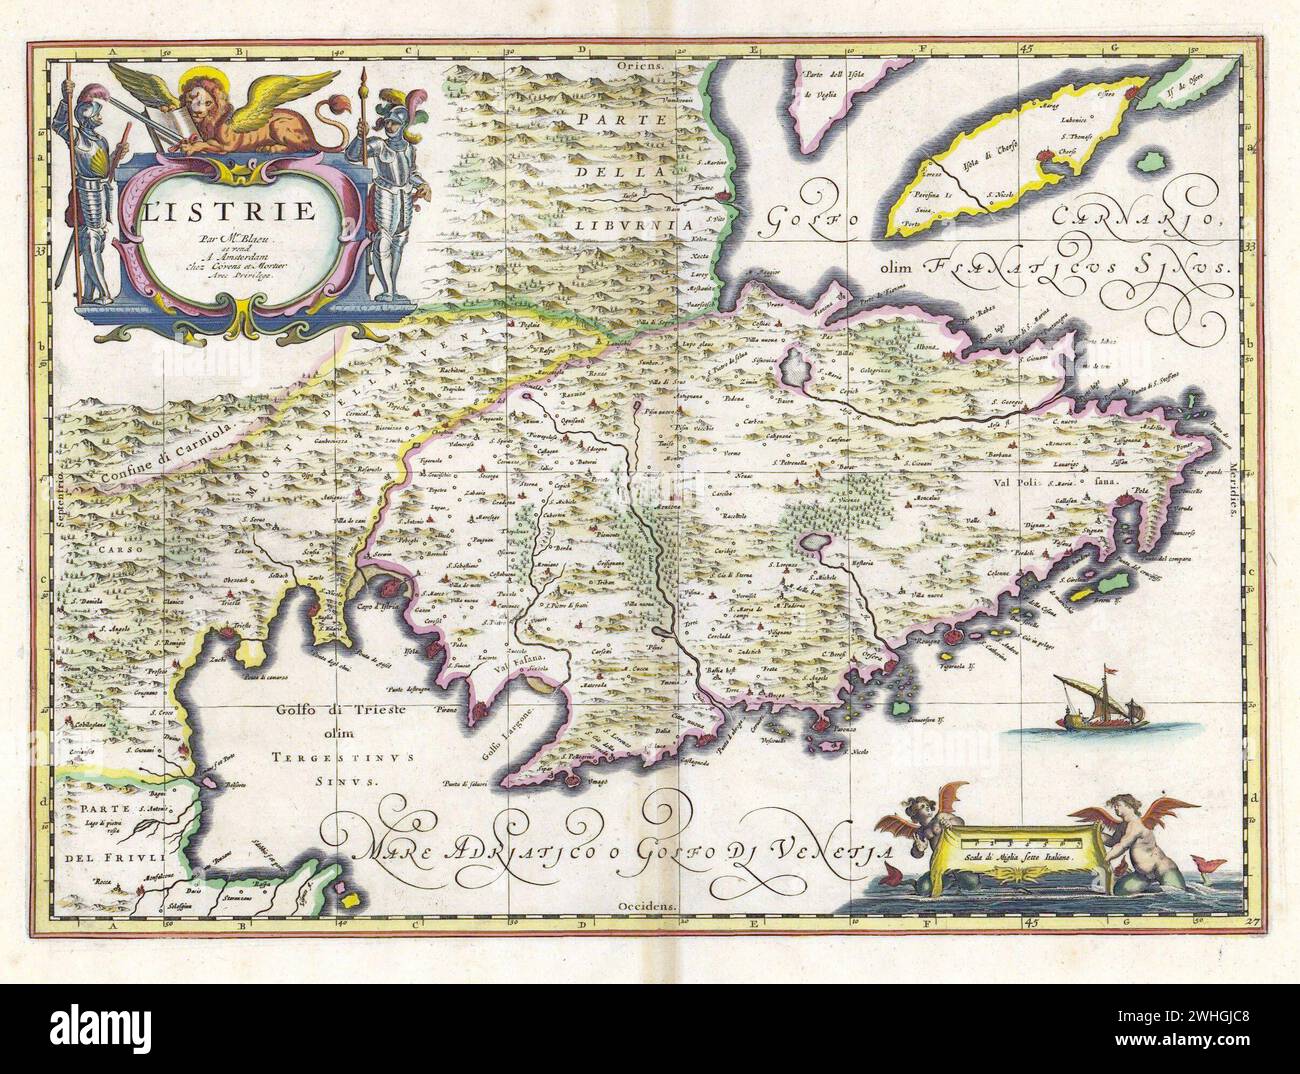 old map of Istria, Adriatic Sea Willem and Johannes Joan Blaeu, 17th century *** old map of Istria, Adriatic Sea Willem and Johannes Joan Blaeu, 17th century Stock Photo